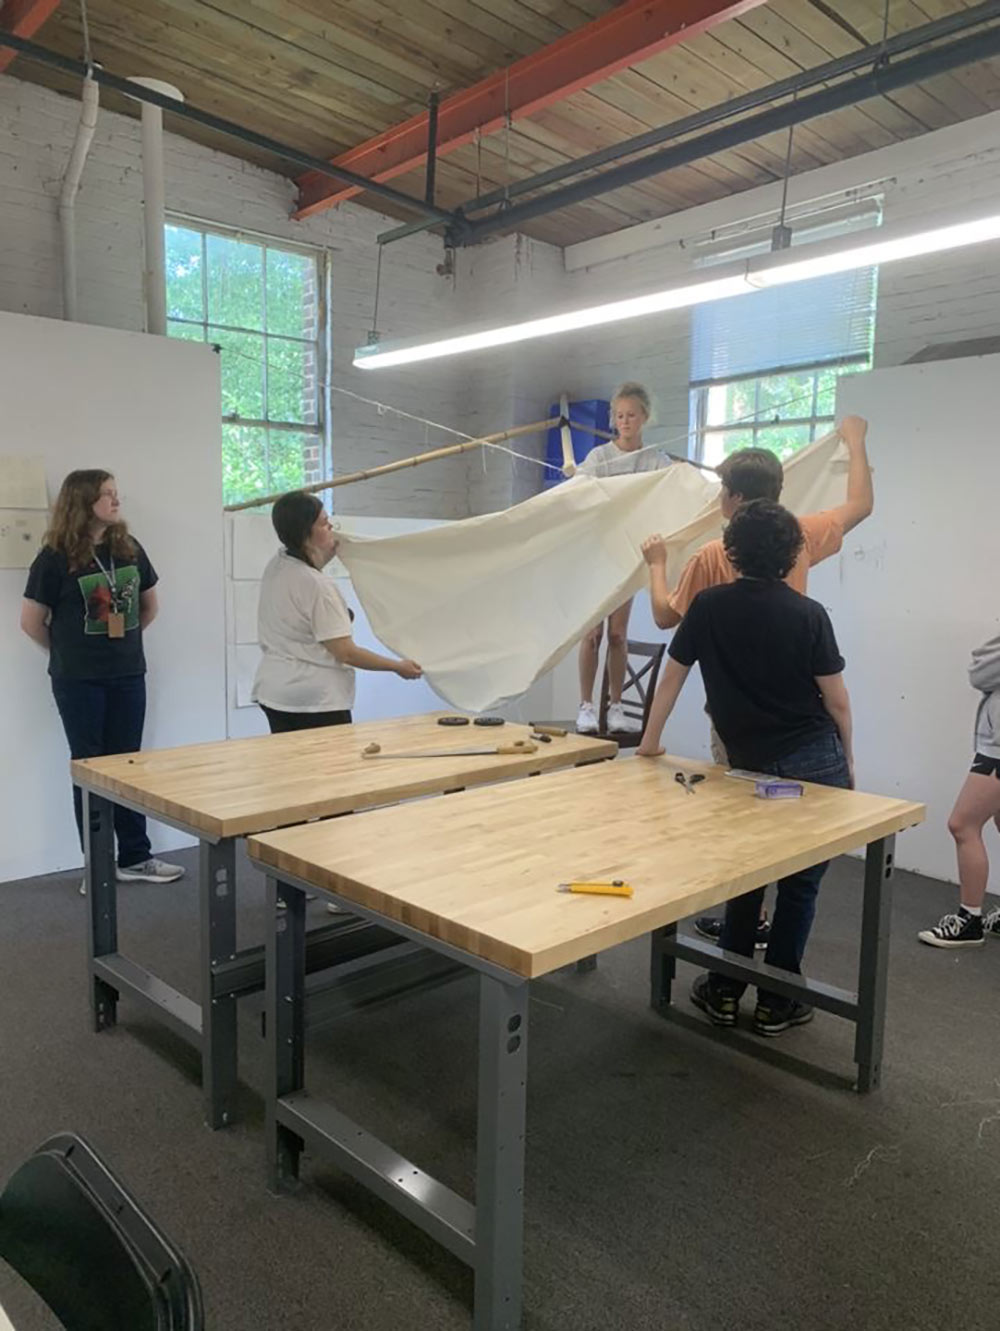 group holds a pice of white fabric, working on instant environment